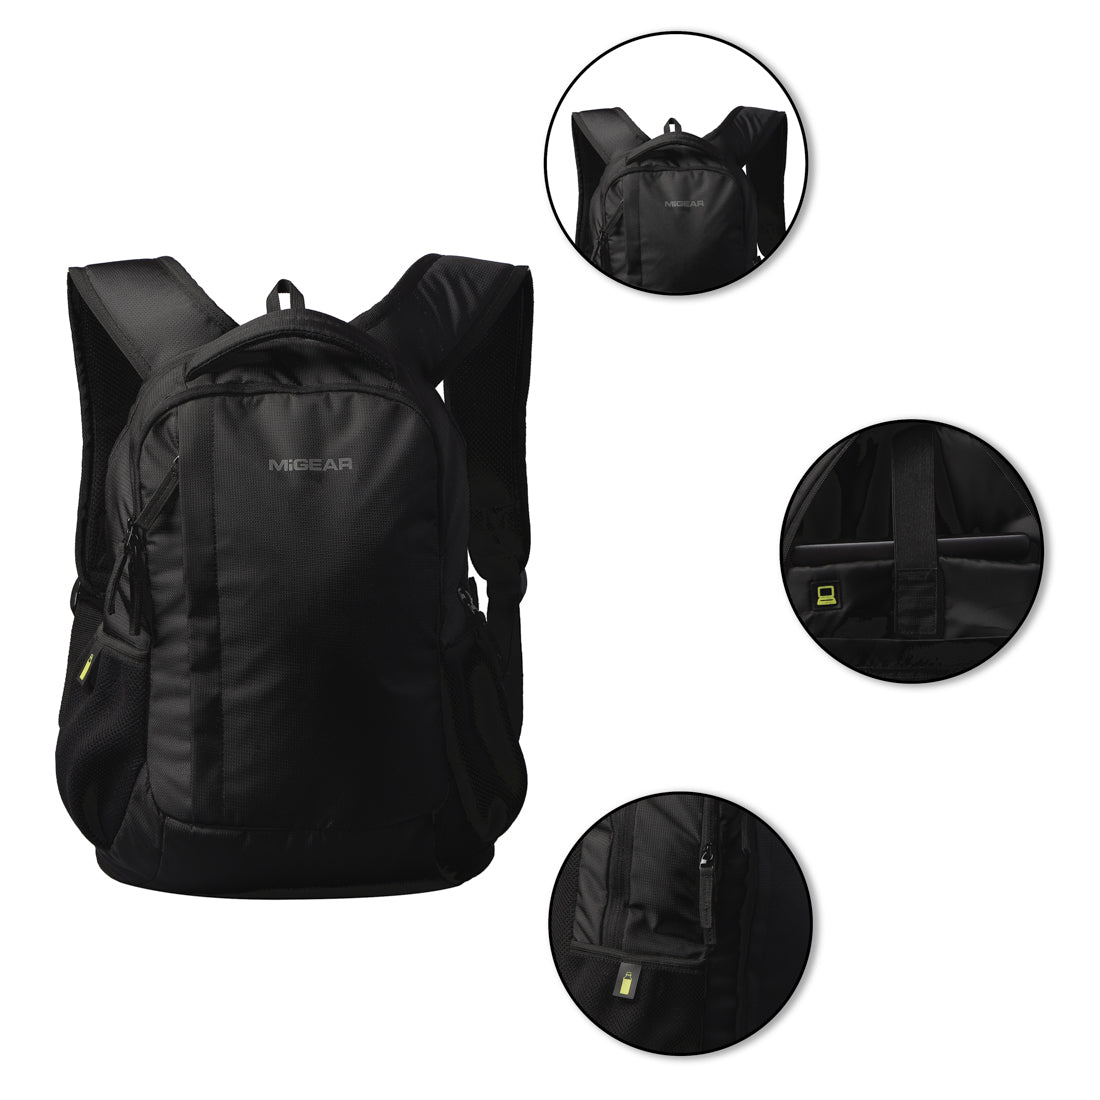 The Draft Backpack